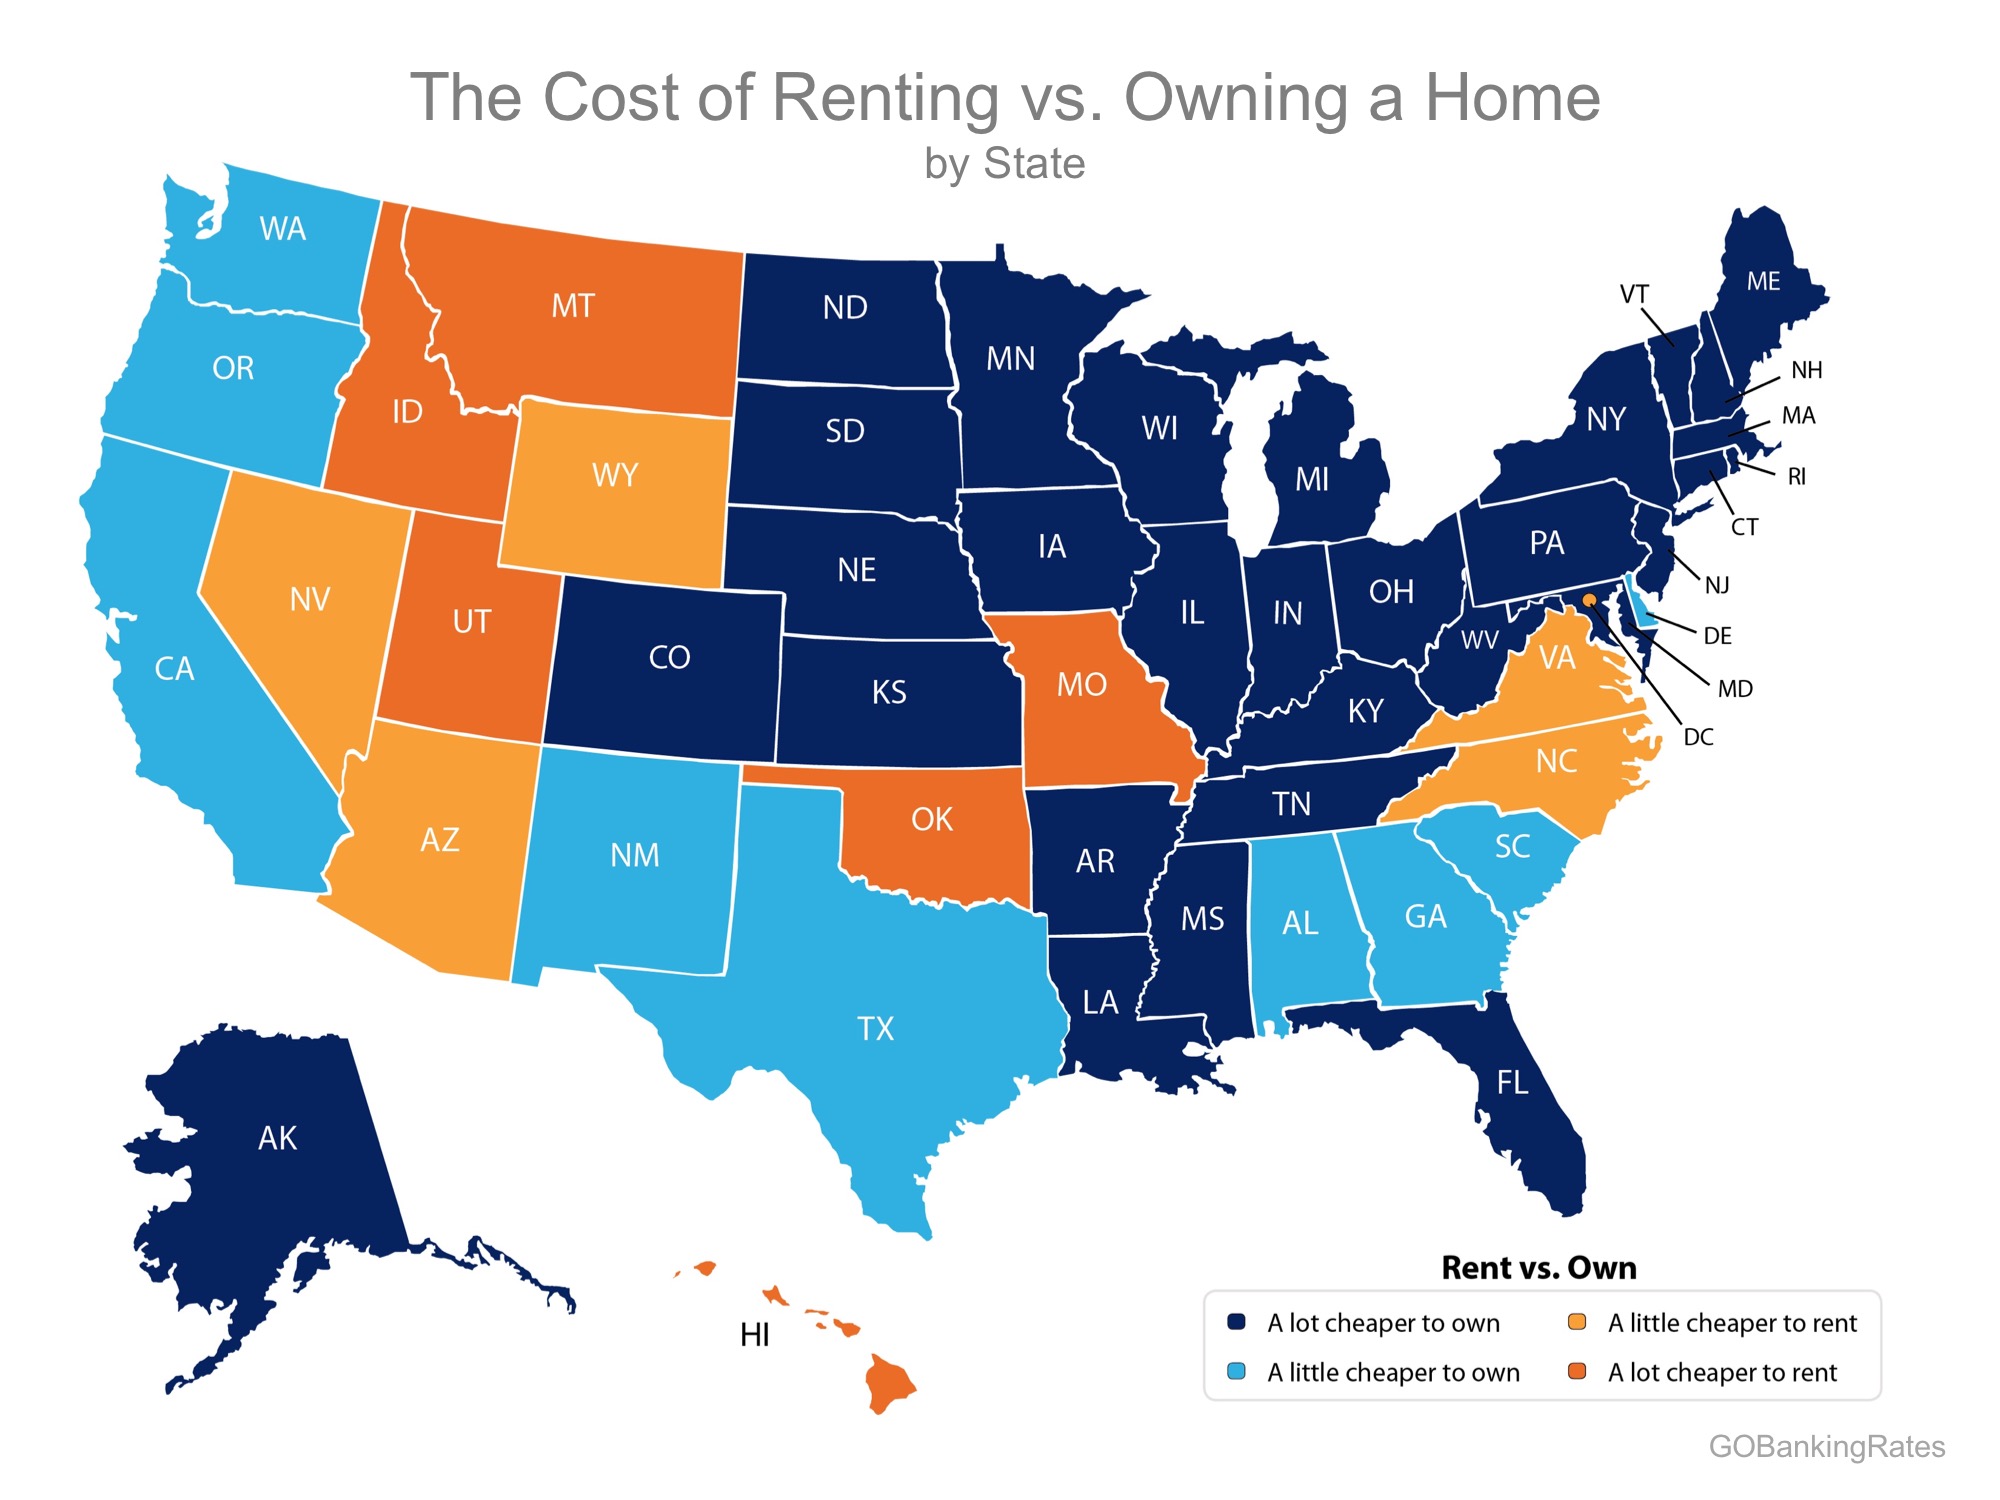 Buying Remains Cheaper Than Renting in 39 States! | Simplifying The Market